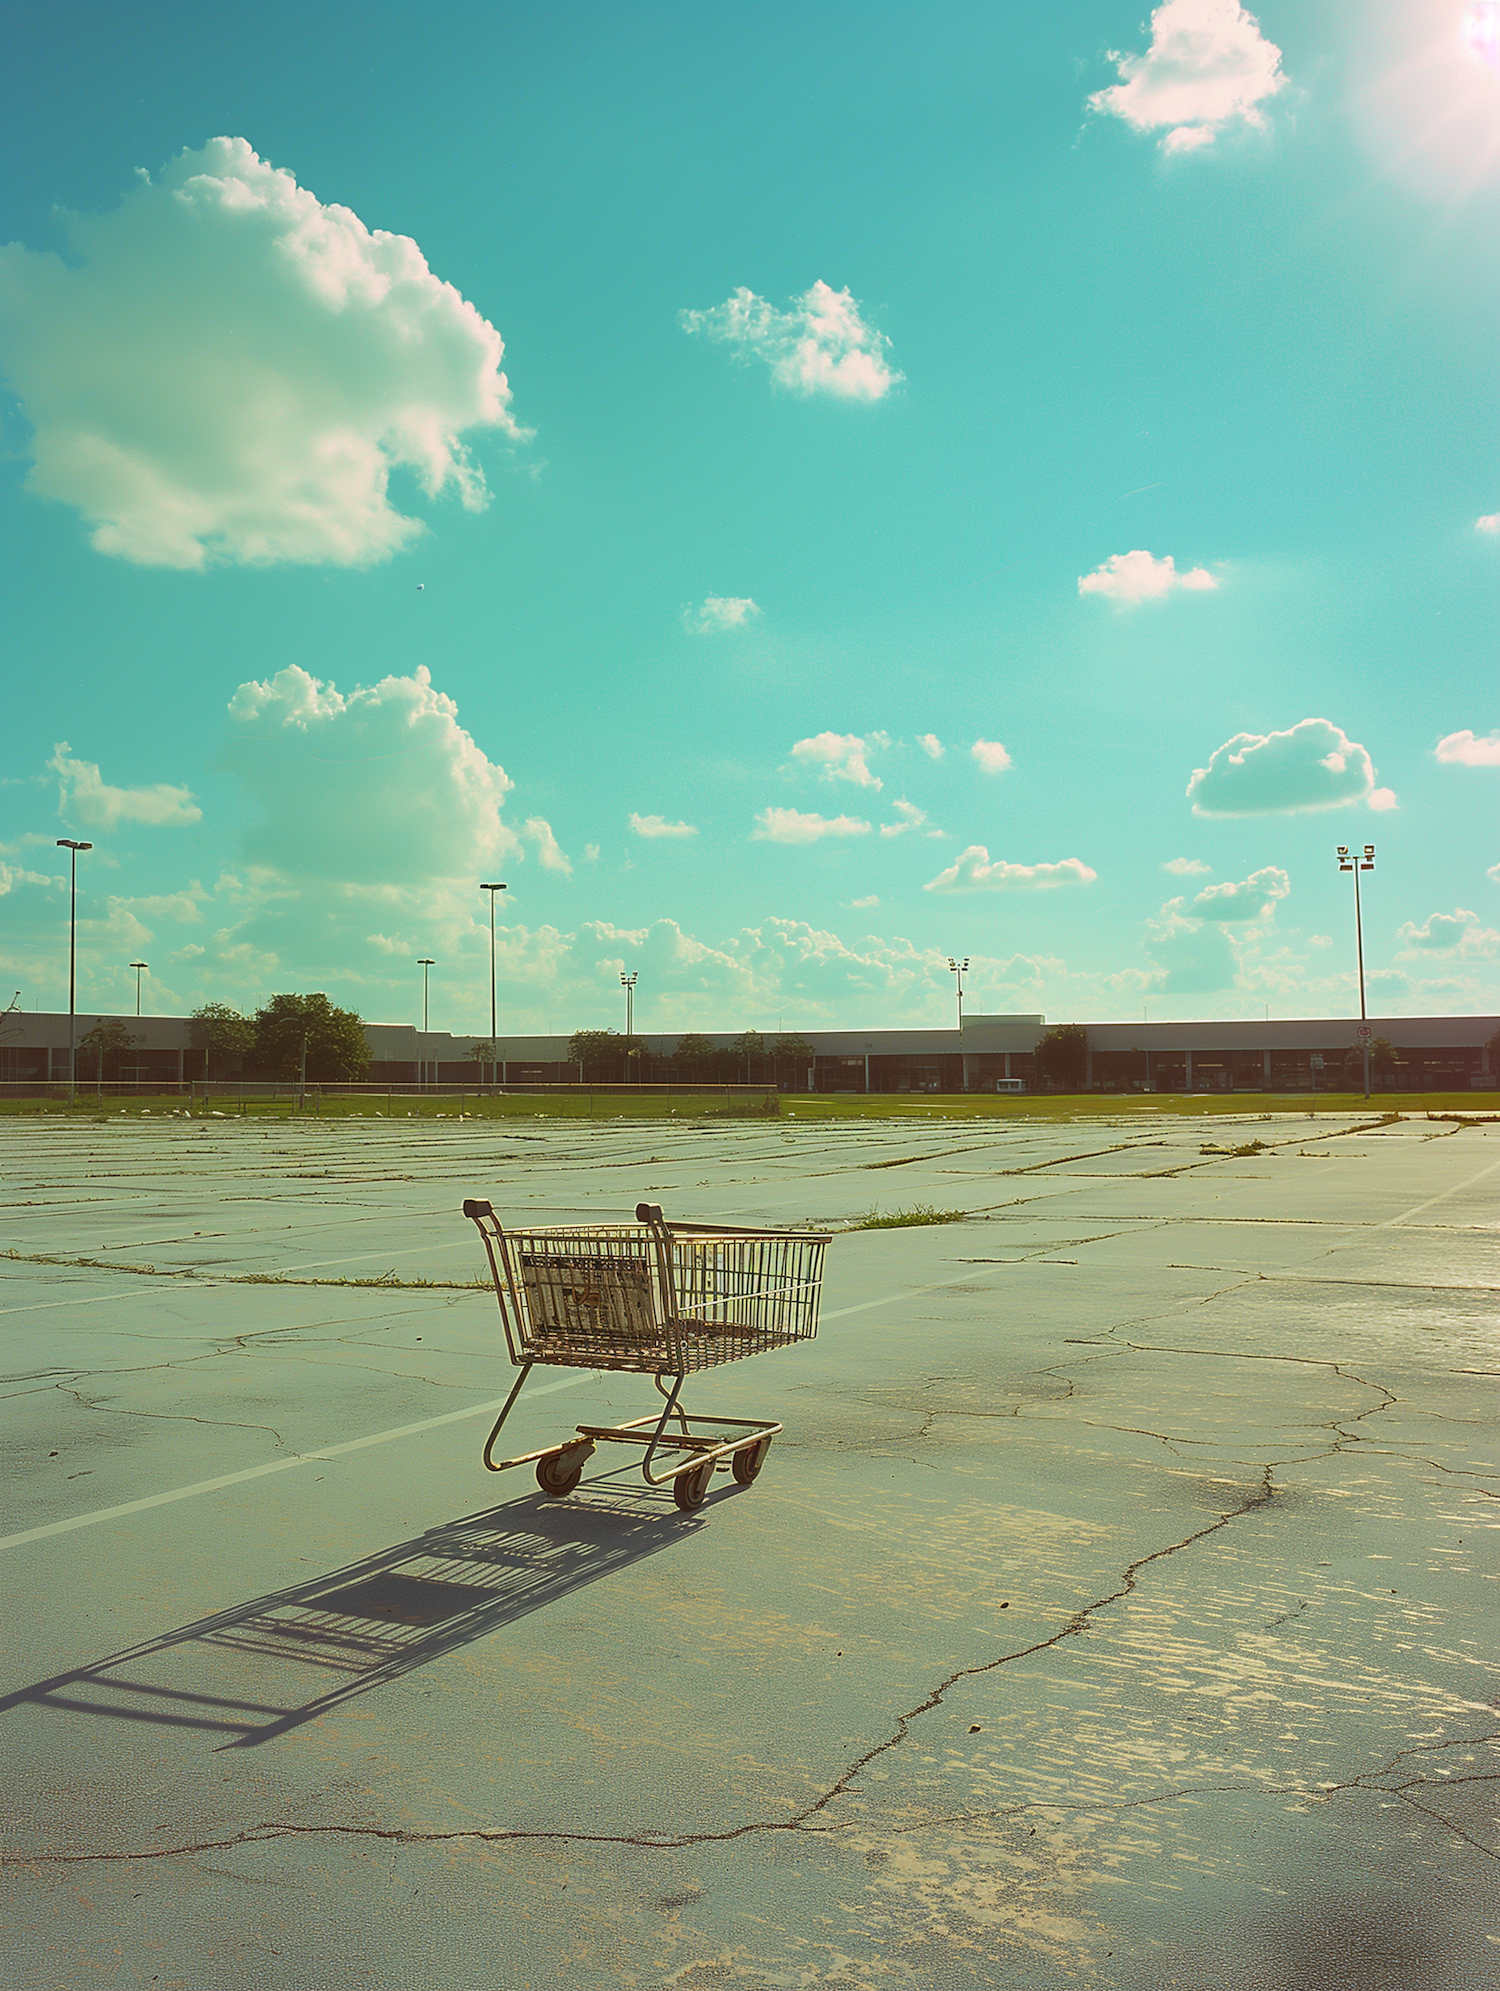 Abandoned Shopping Cart in Parking Lot